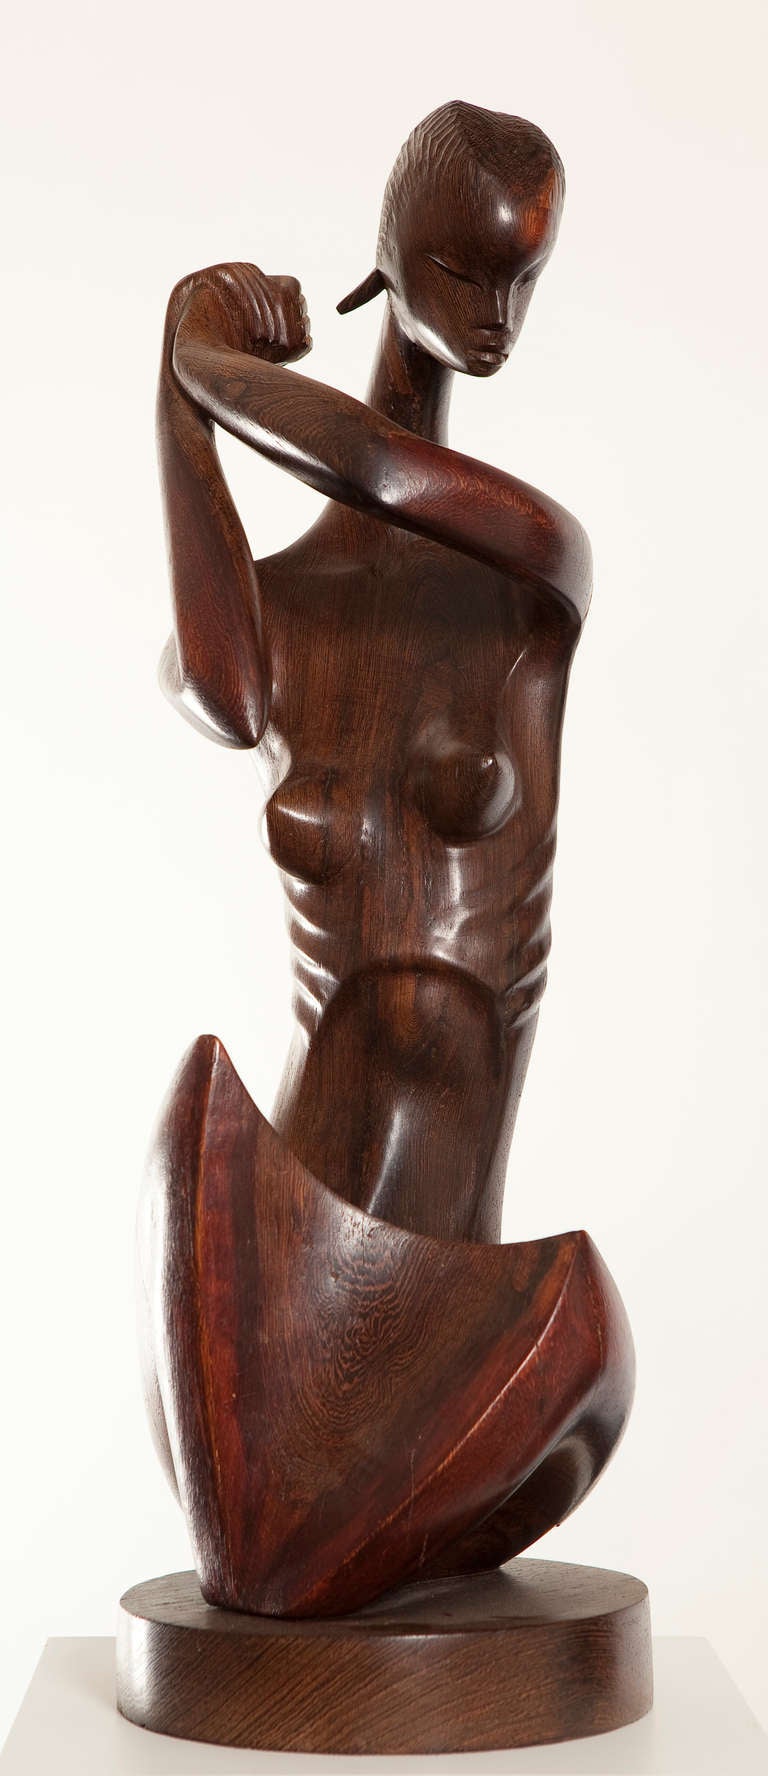 Carved Wooden Sculpture by Congolese Artist Ndombele For Sale